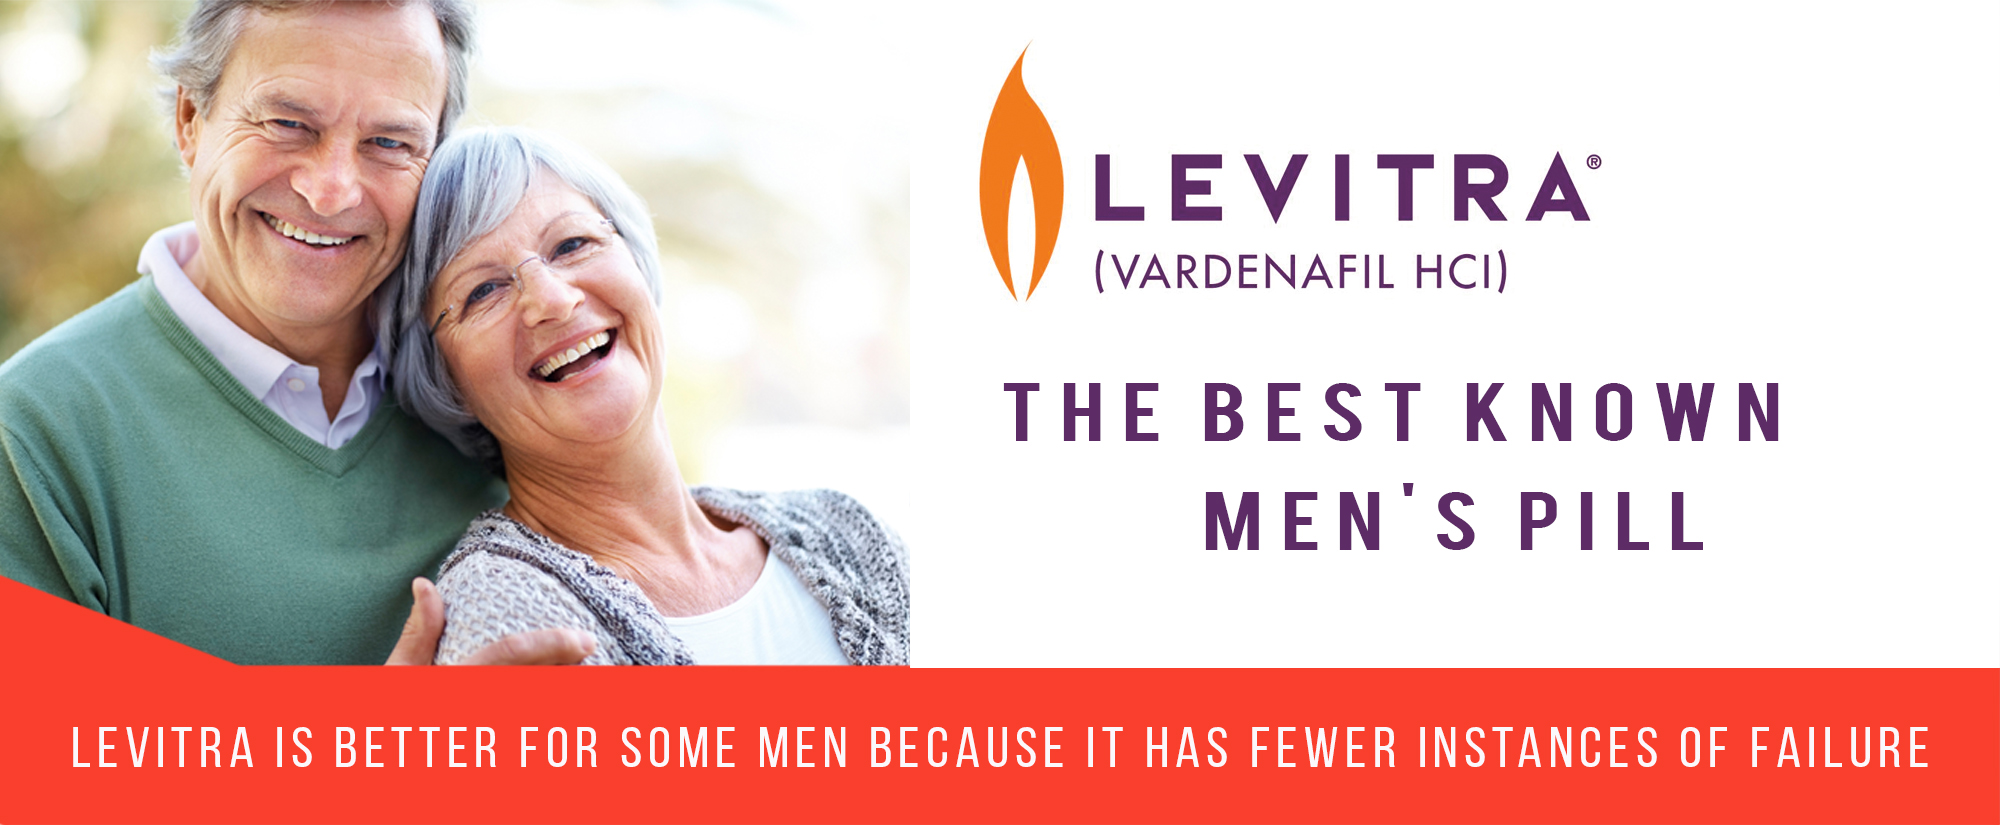 Levitra is better for some men because it has fewer instances of failure